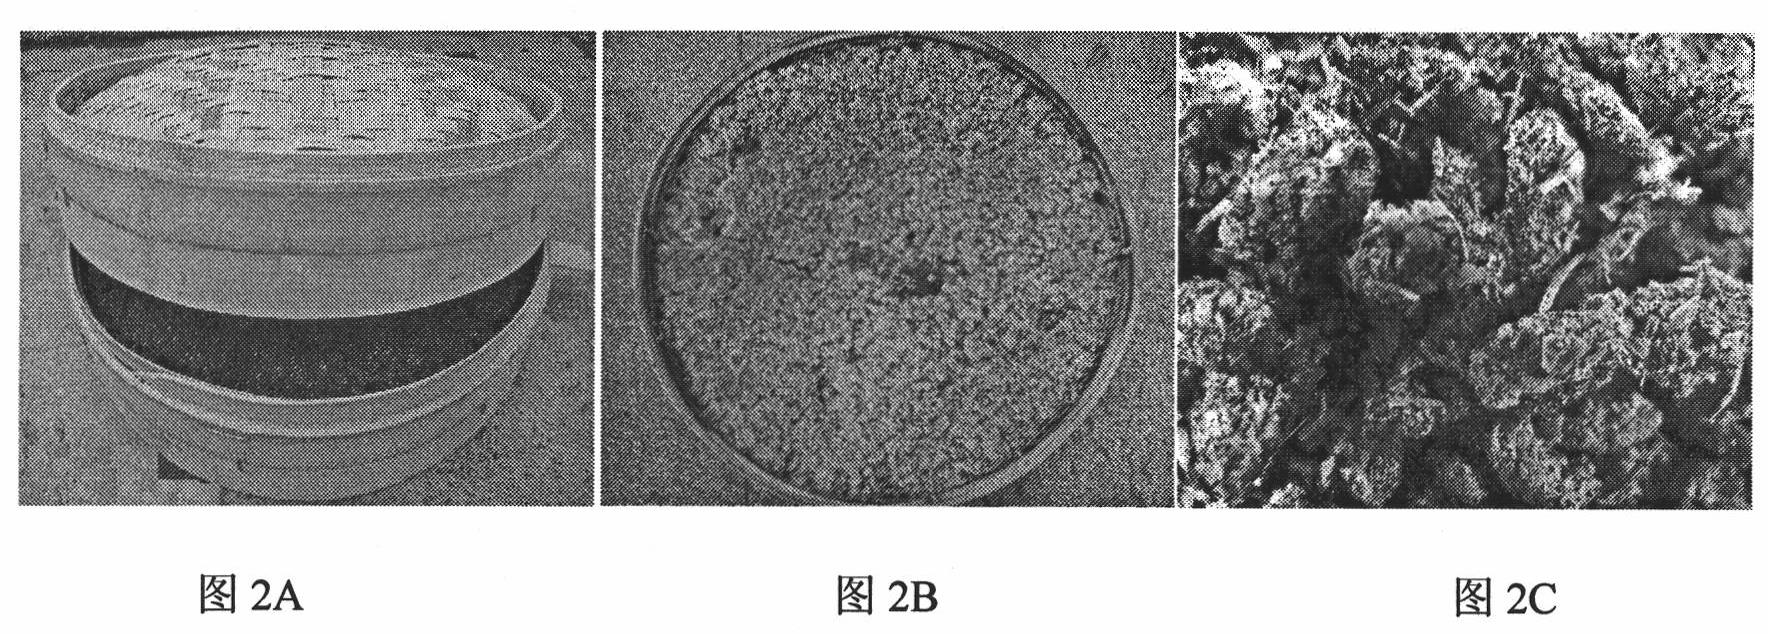 Biological fungi-proofing coniothyrium minitans ZS-1SB for preventing and treating sclerotinia as well as preparation method and application thereof